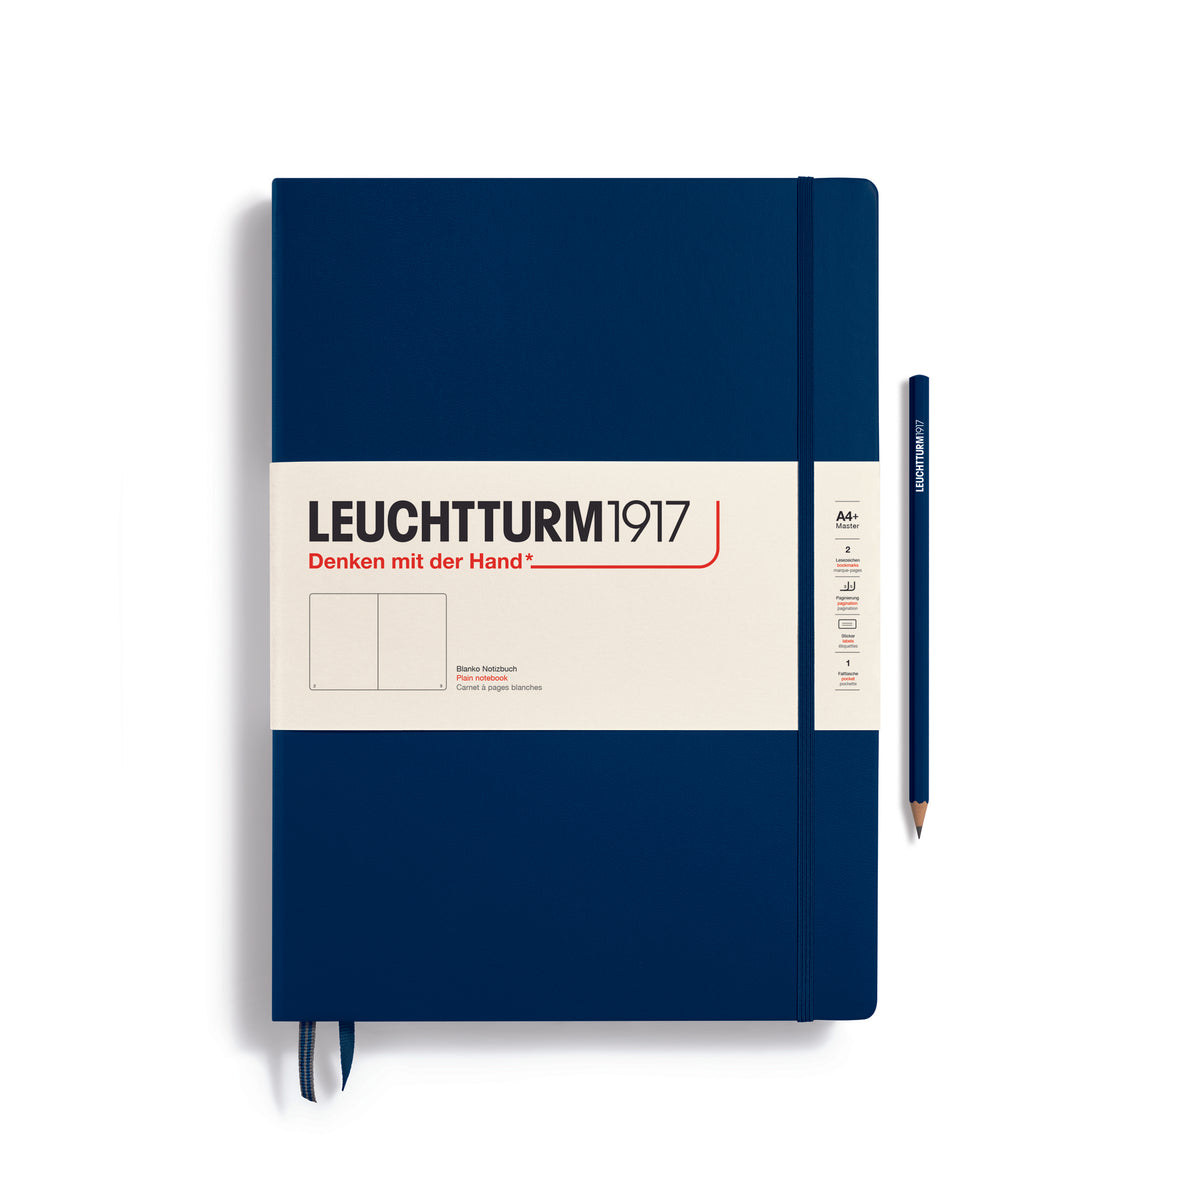 A large dark blue notebook with a white paper band around it with the logo of the brand Leuchtturm1917. Below this is an image of the page ruling inside - in this case, plain or blank. It has two page marker ribbons showing at the bottom near the binding and a matching colour elastic notebook closure holding it neatly together. A dark blue Leuchtturm pencil is shown at the side of the book.